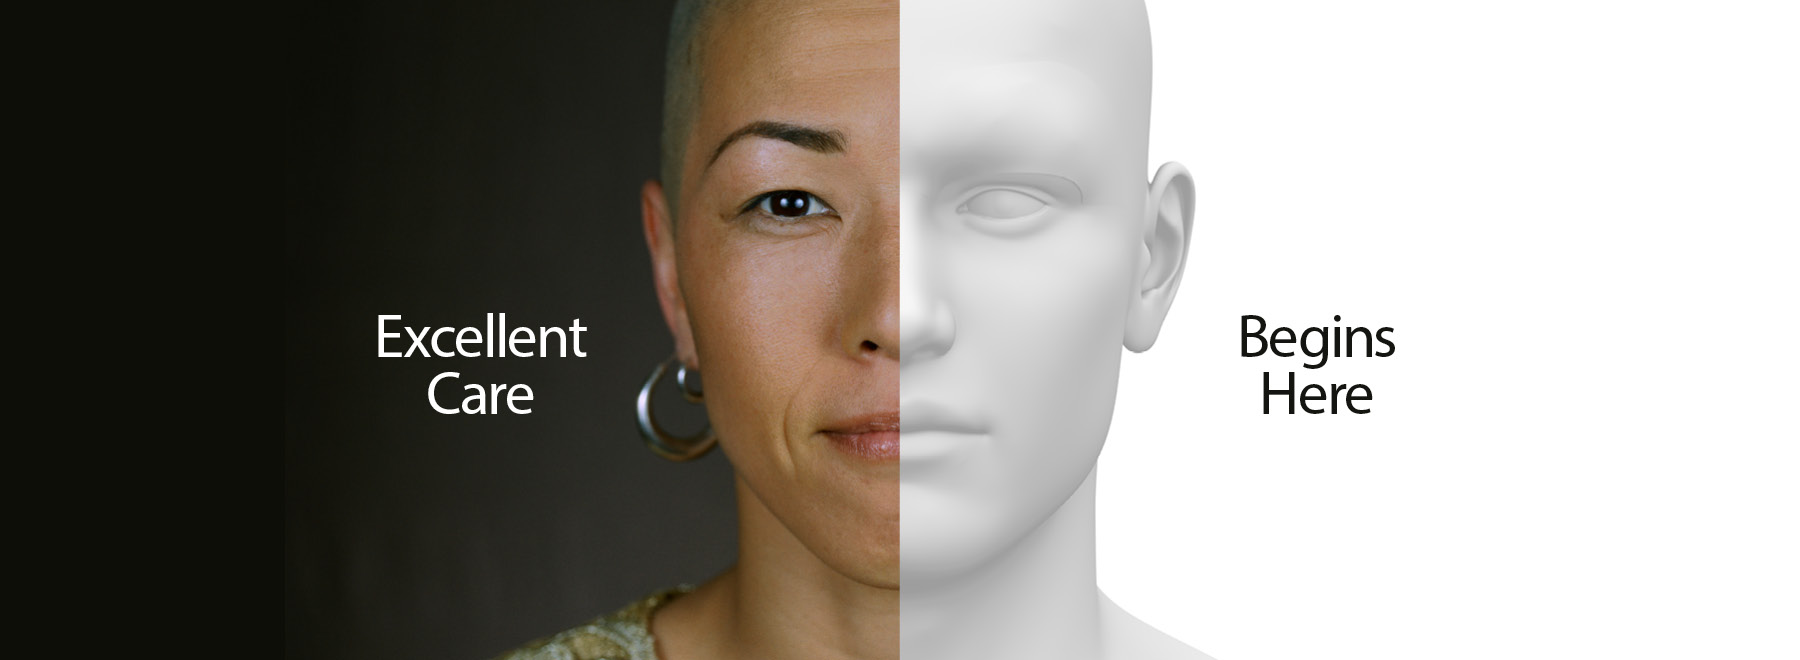 Graphic half simulation mannequin face, half woman's face. Text says 